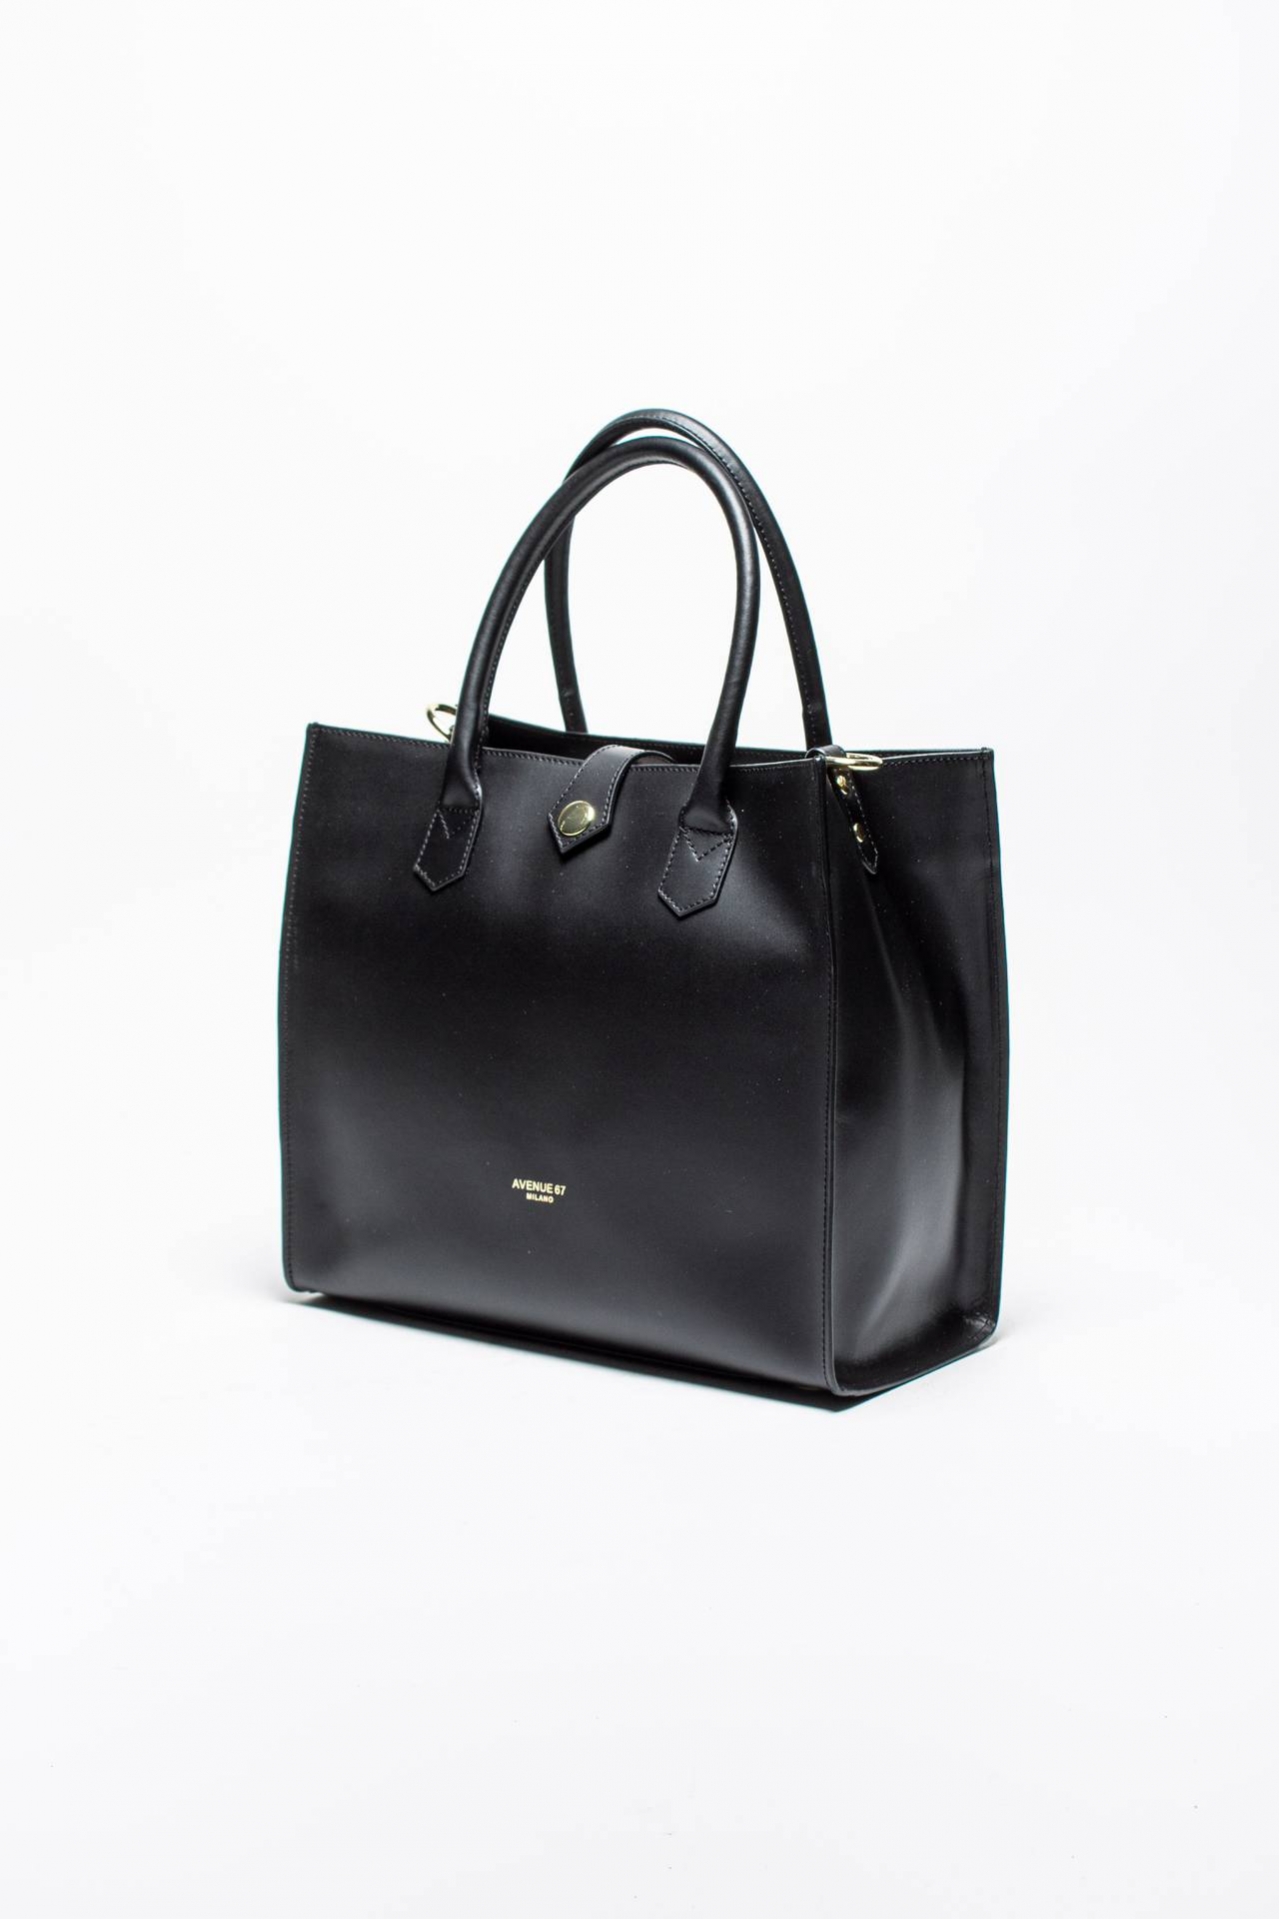 SIENNA bag in leather